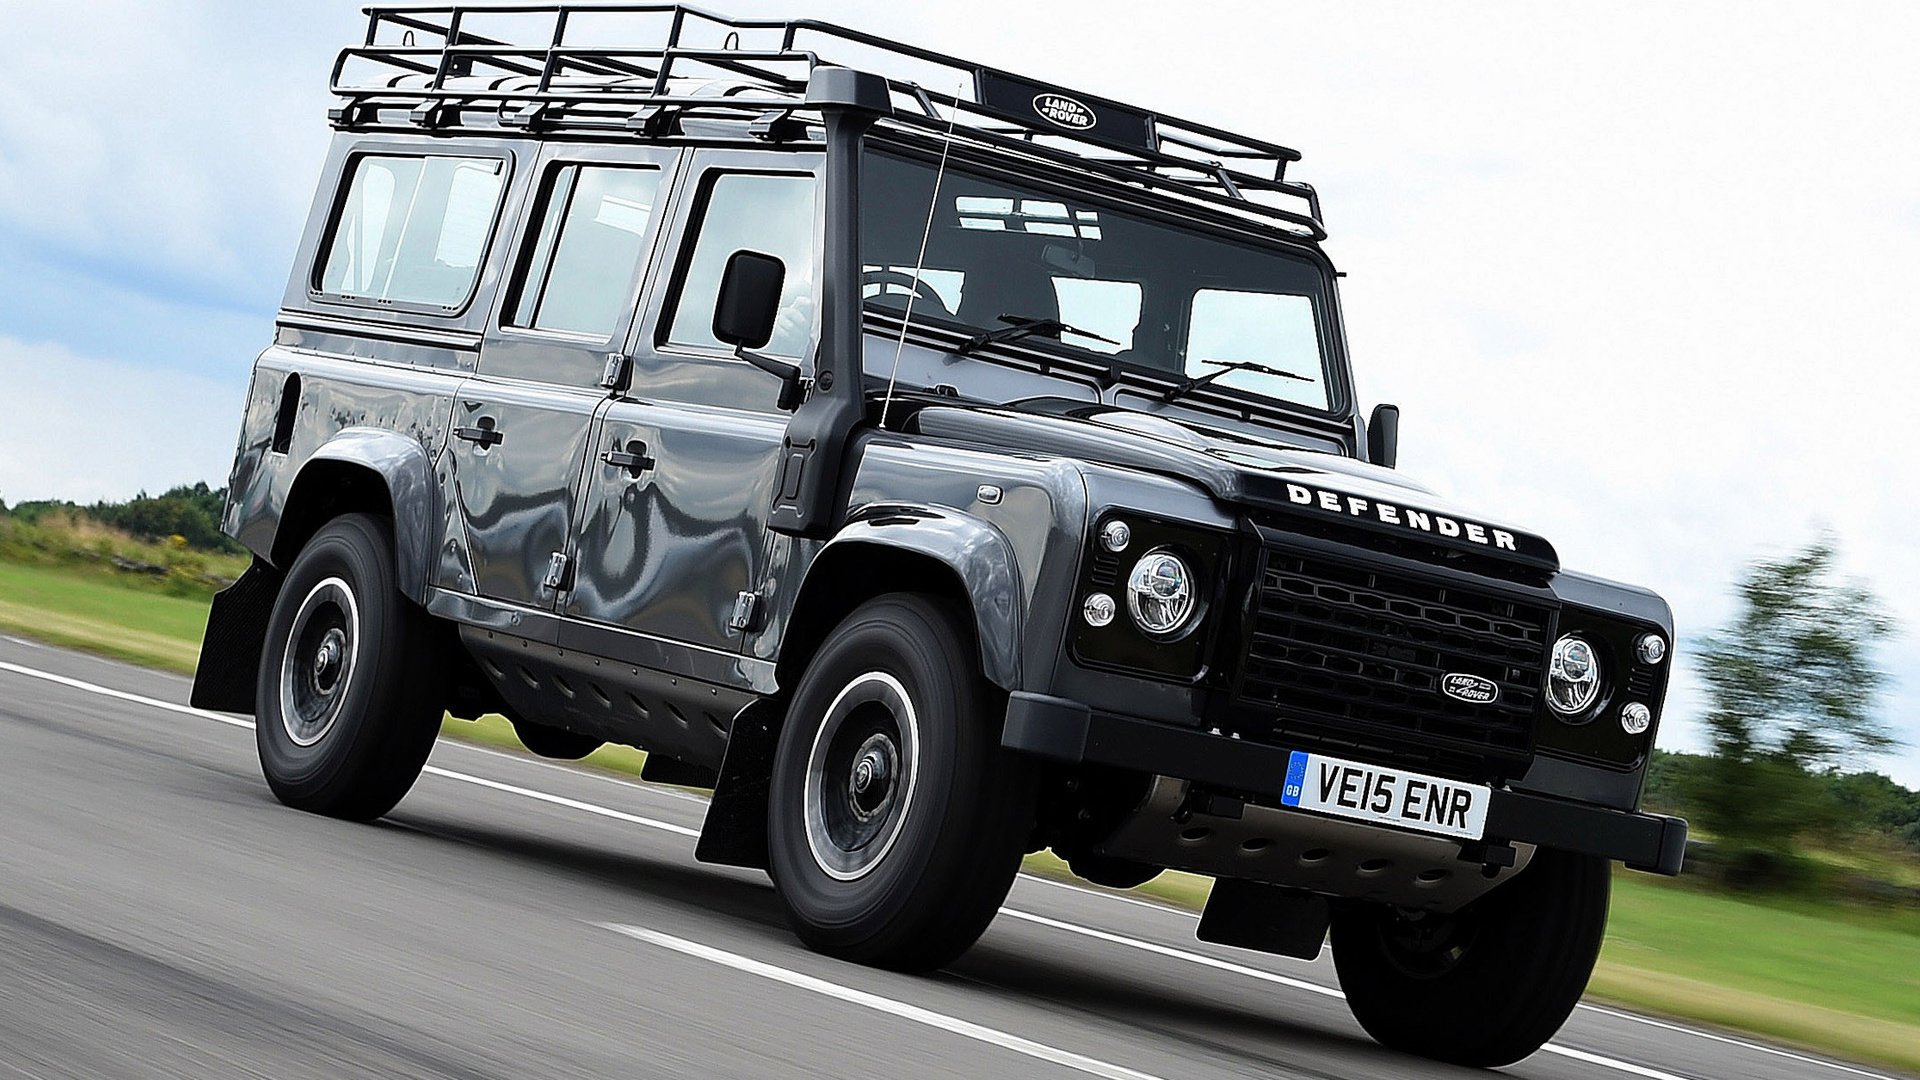 Land Rover Defender 110 Adventure (UK) and HD Image